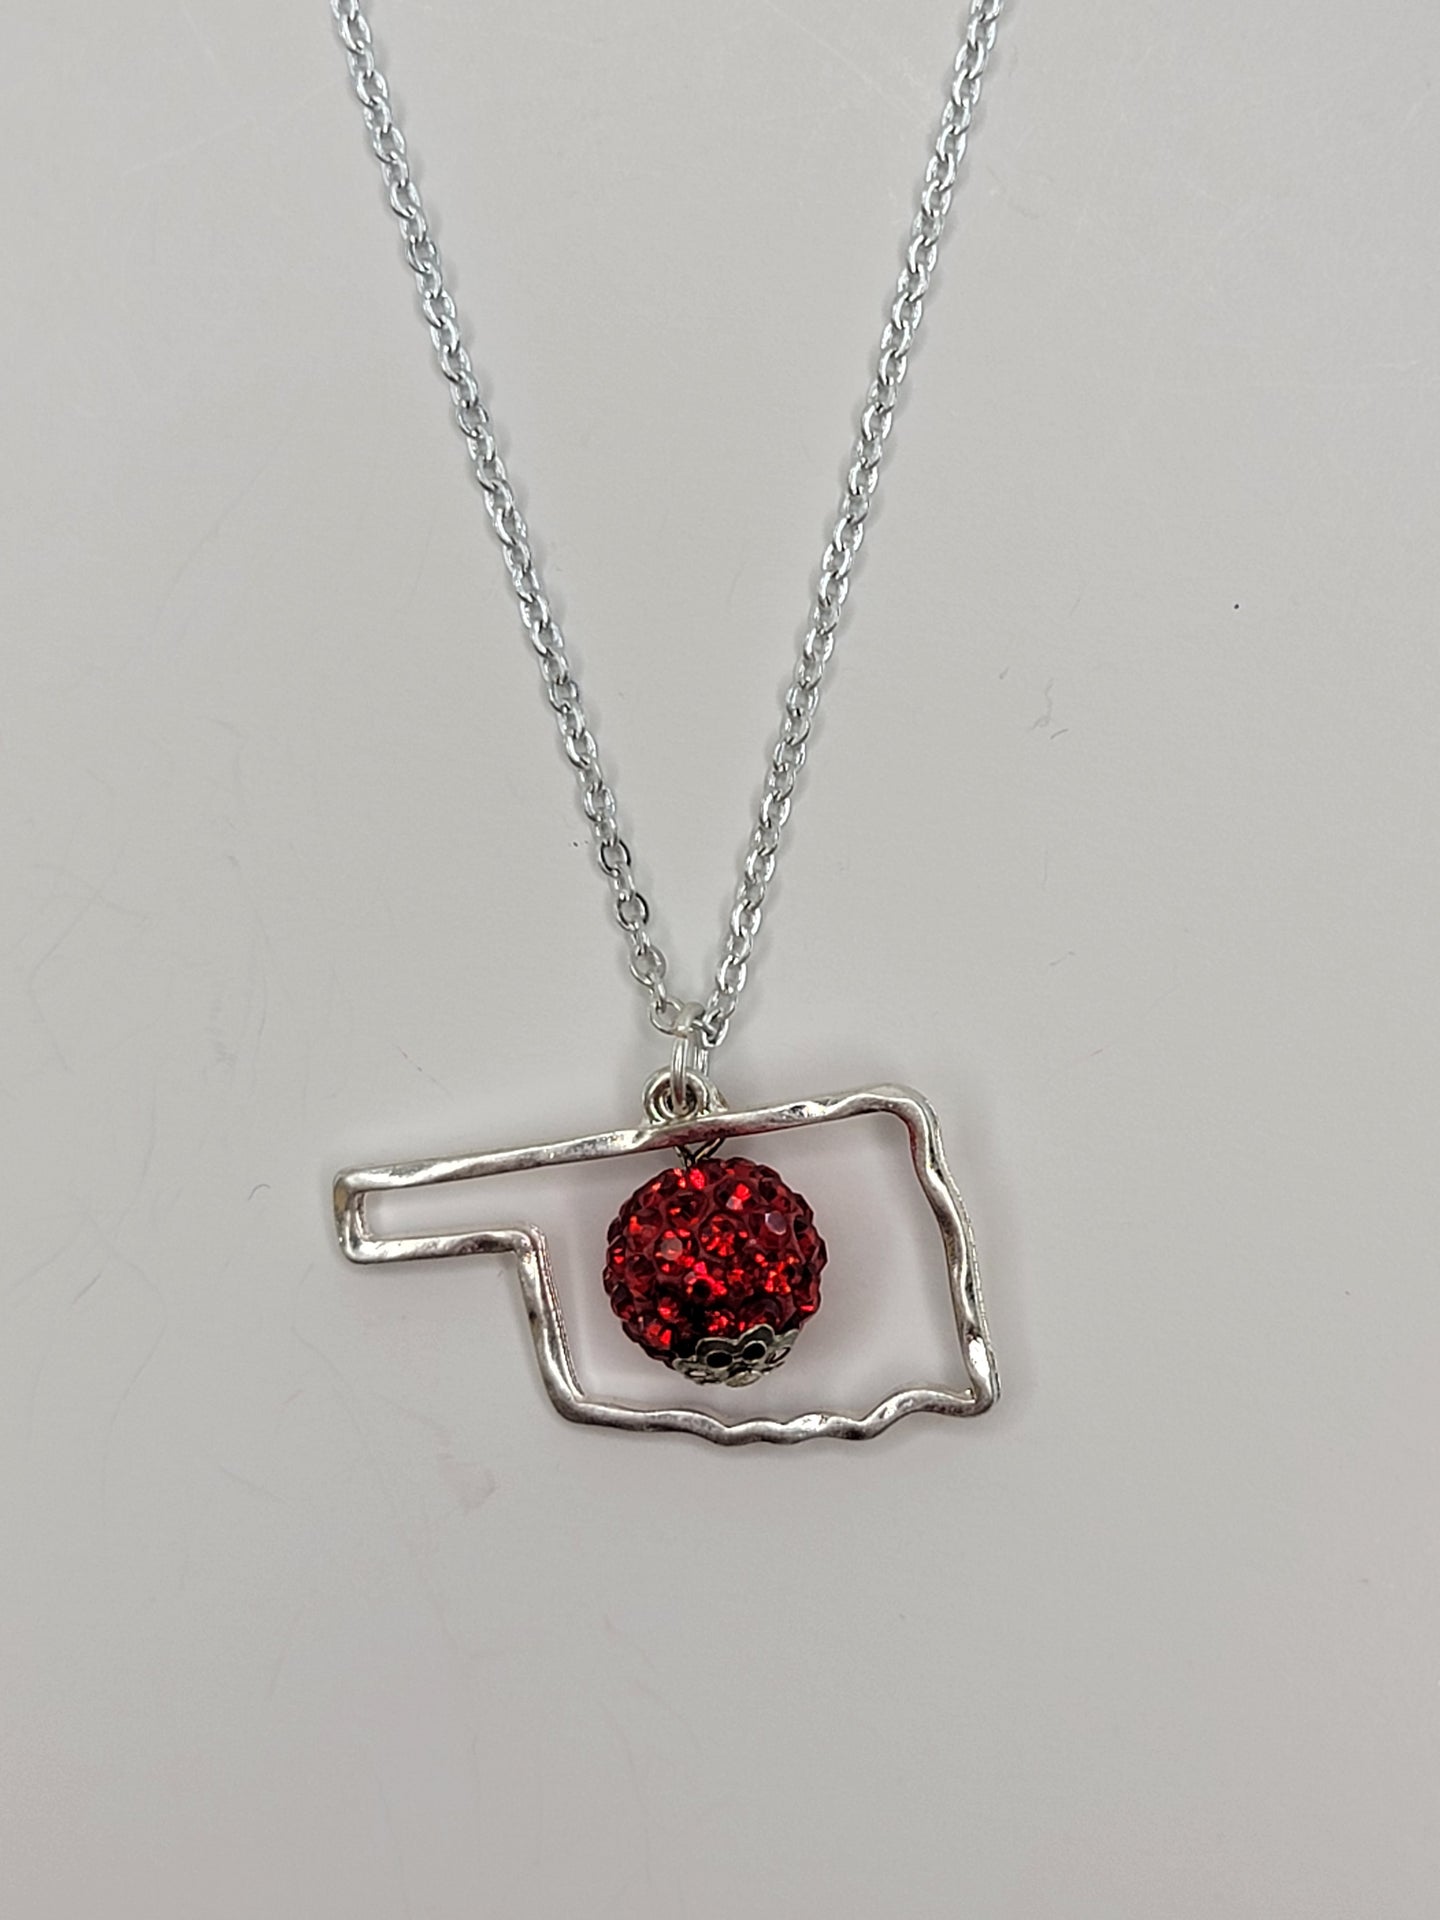 Silver Oklahoma Outline Necklace - Red